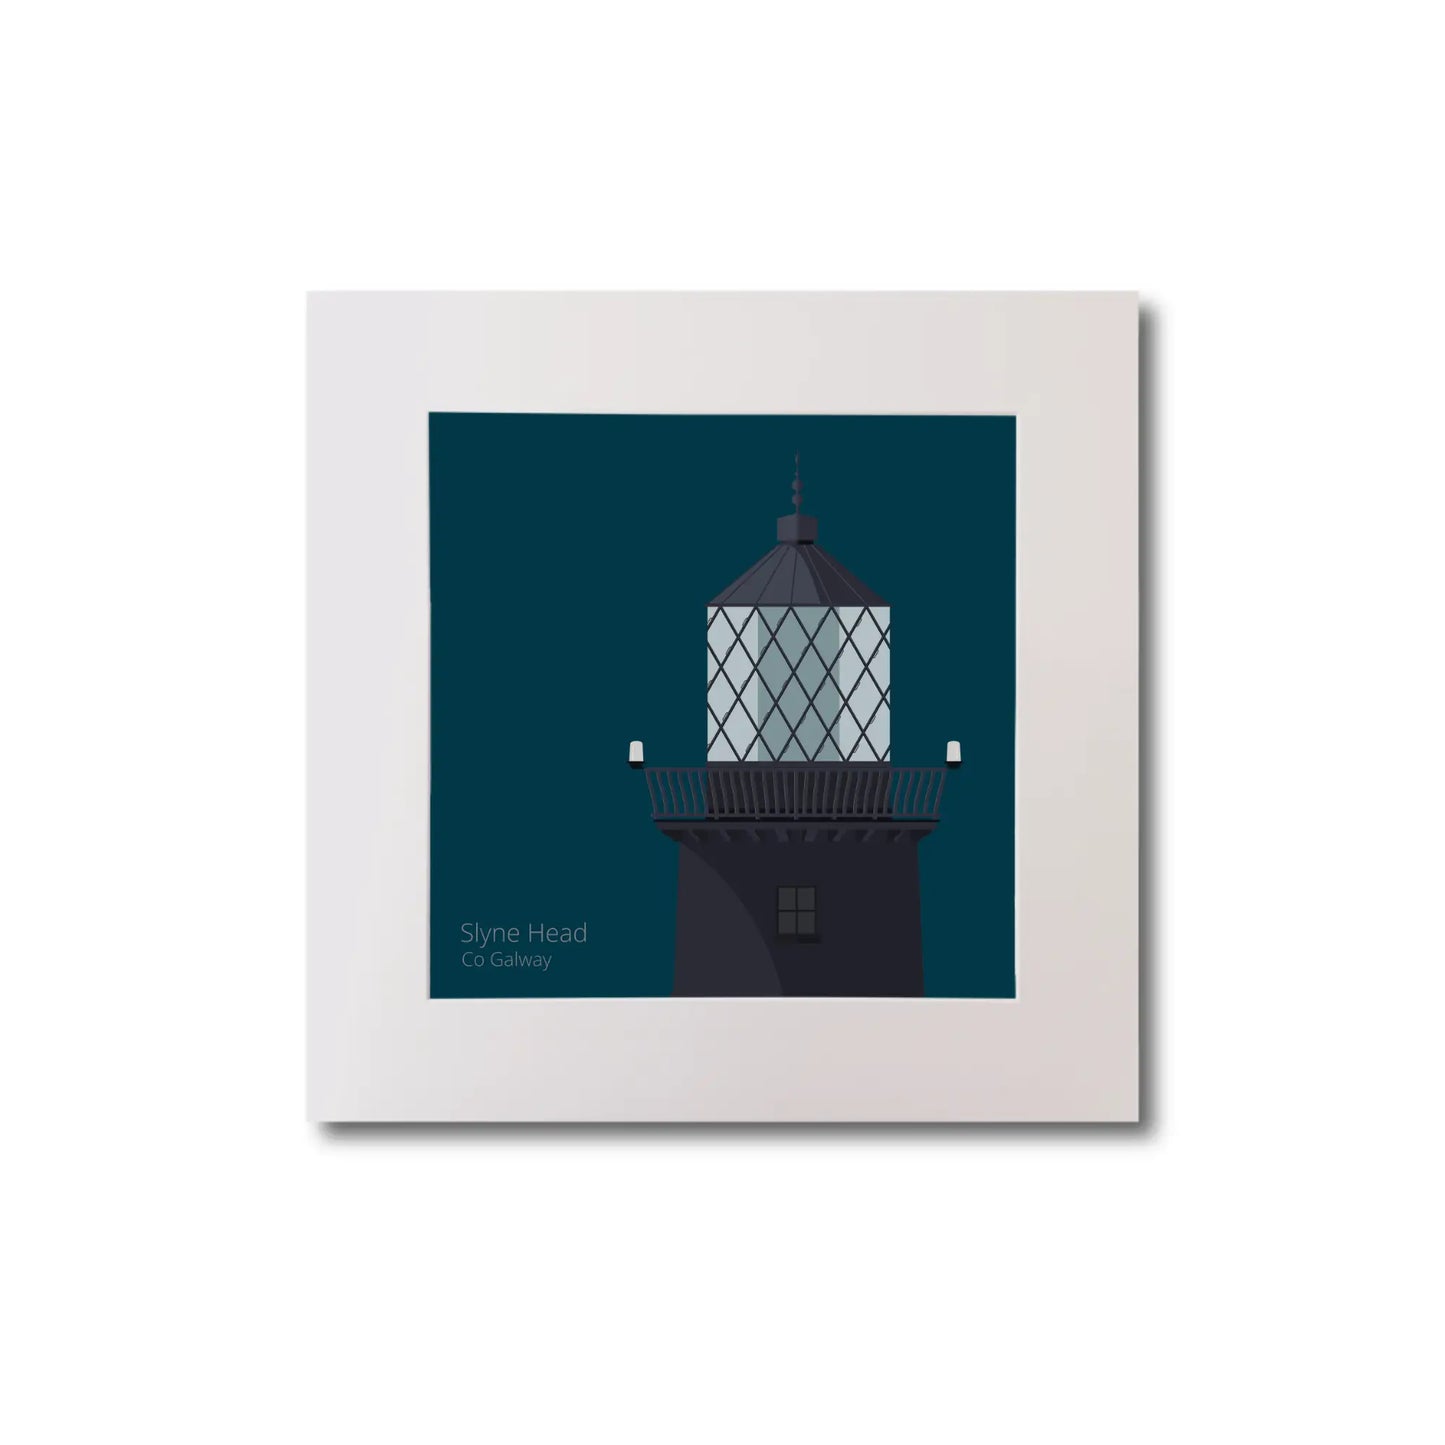 Illustration of Slyne Head lighthouse on a midnight blue background, mounted and measuring 20x20cm.